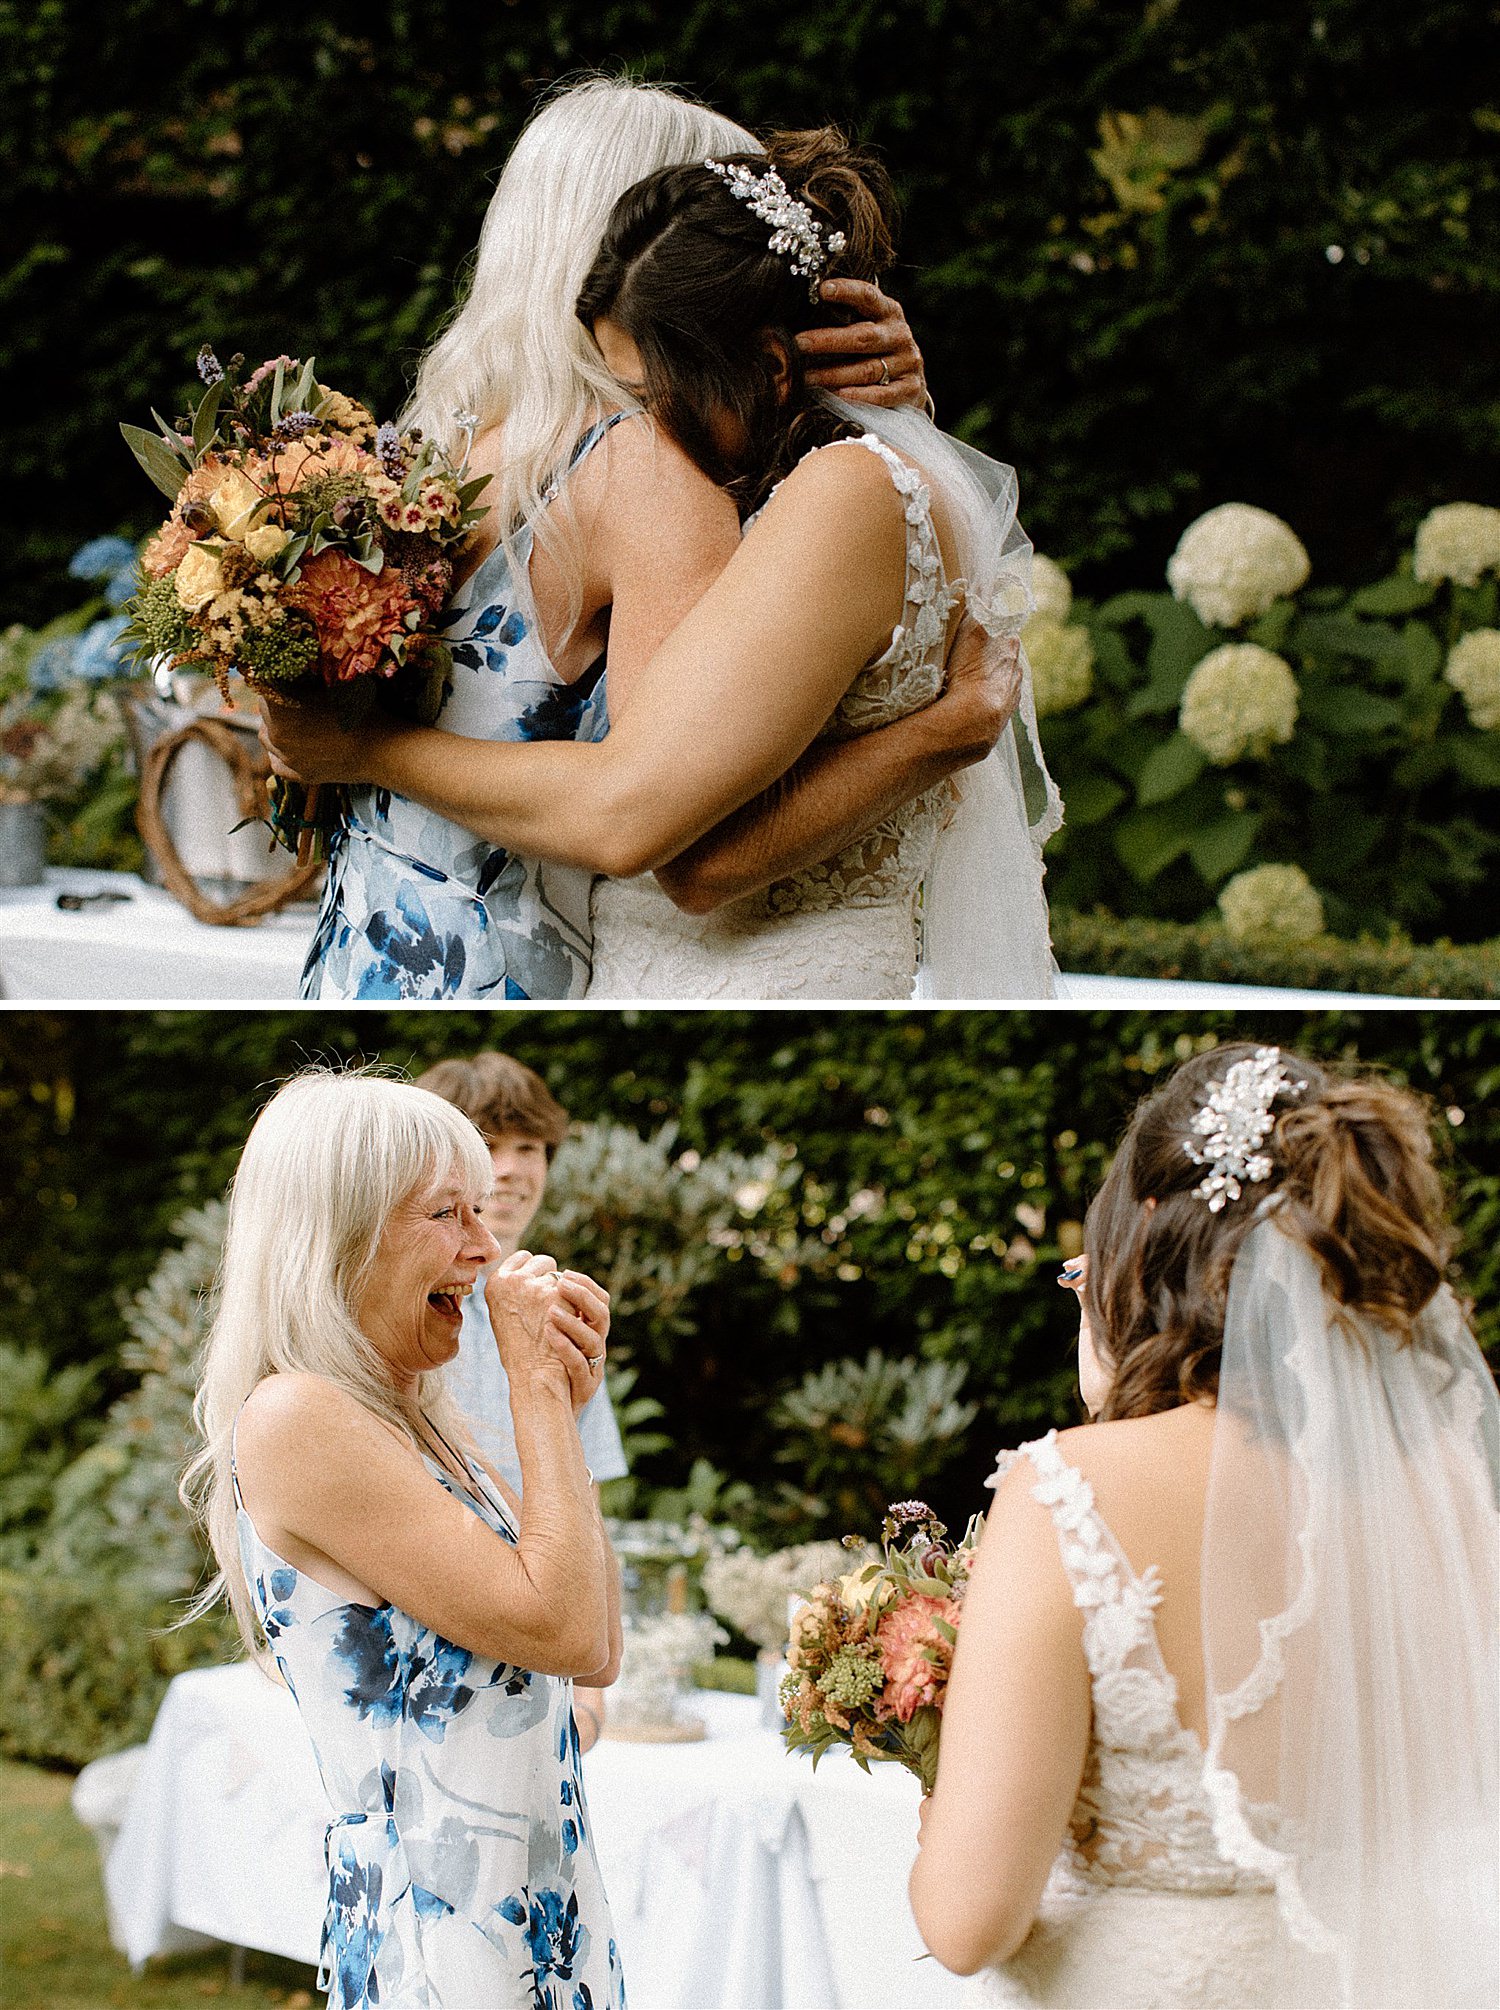 guest reaction cries and hugs at seeing the bride on her wedding day